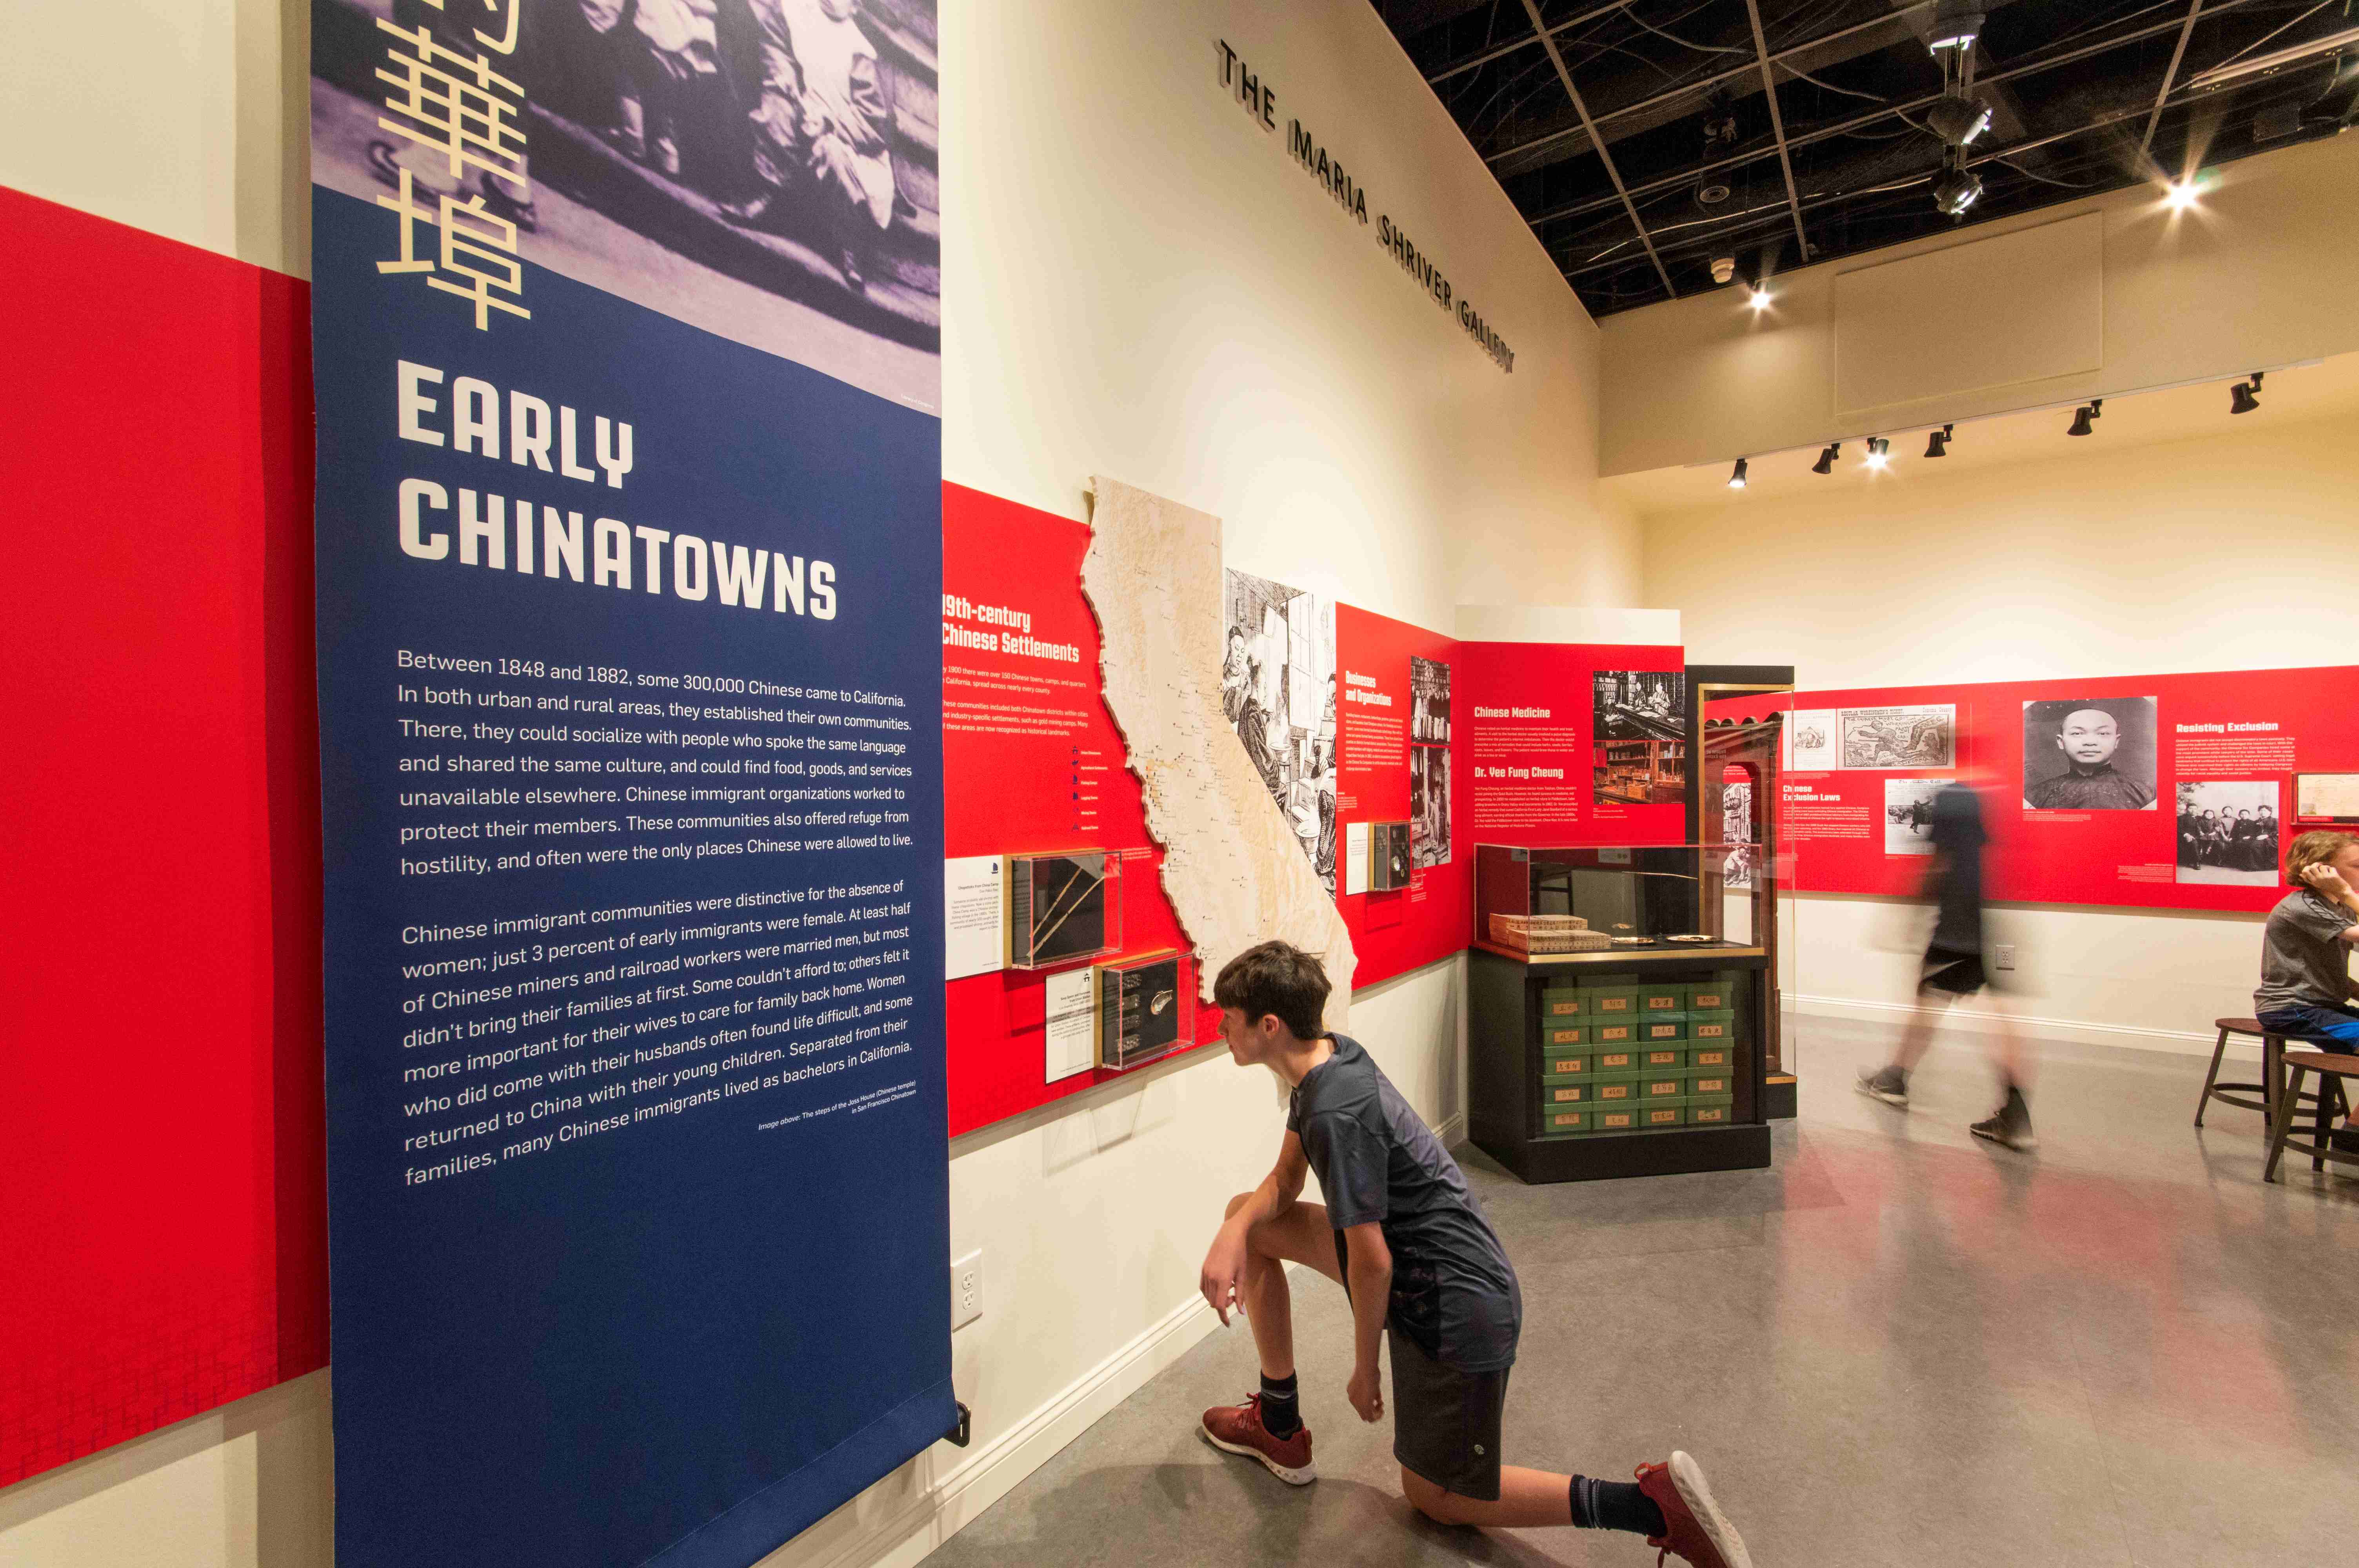 A boy kneeling down looking at an infographic in the Gold Mountain exhibit.